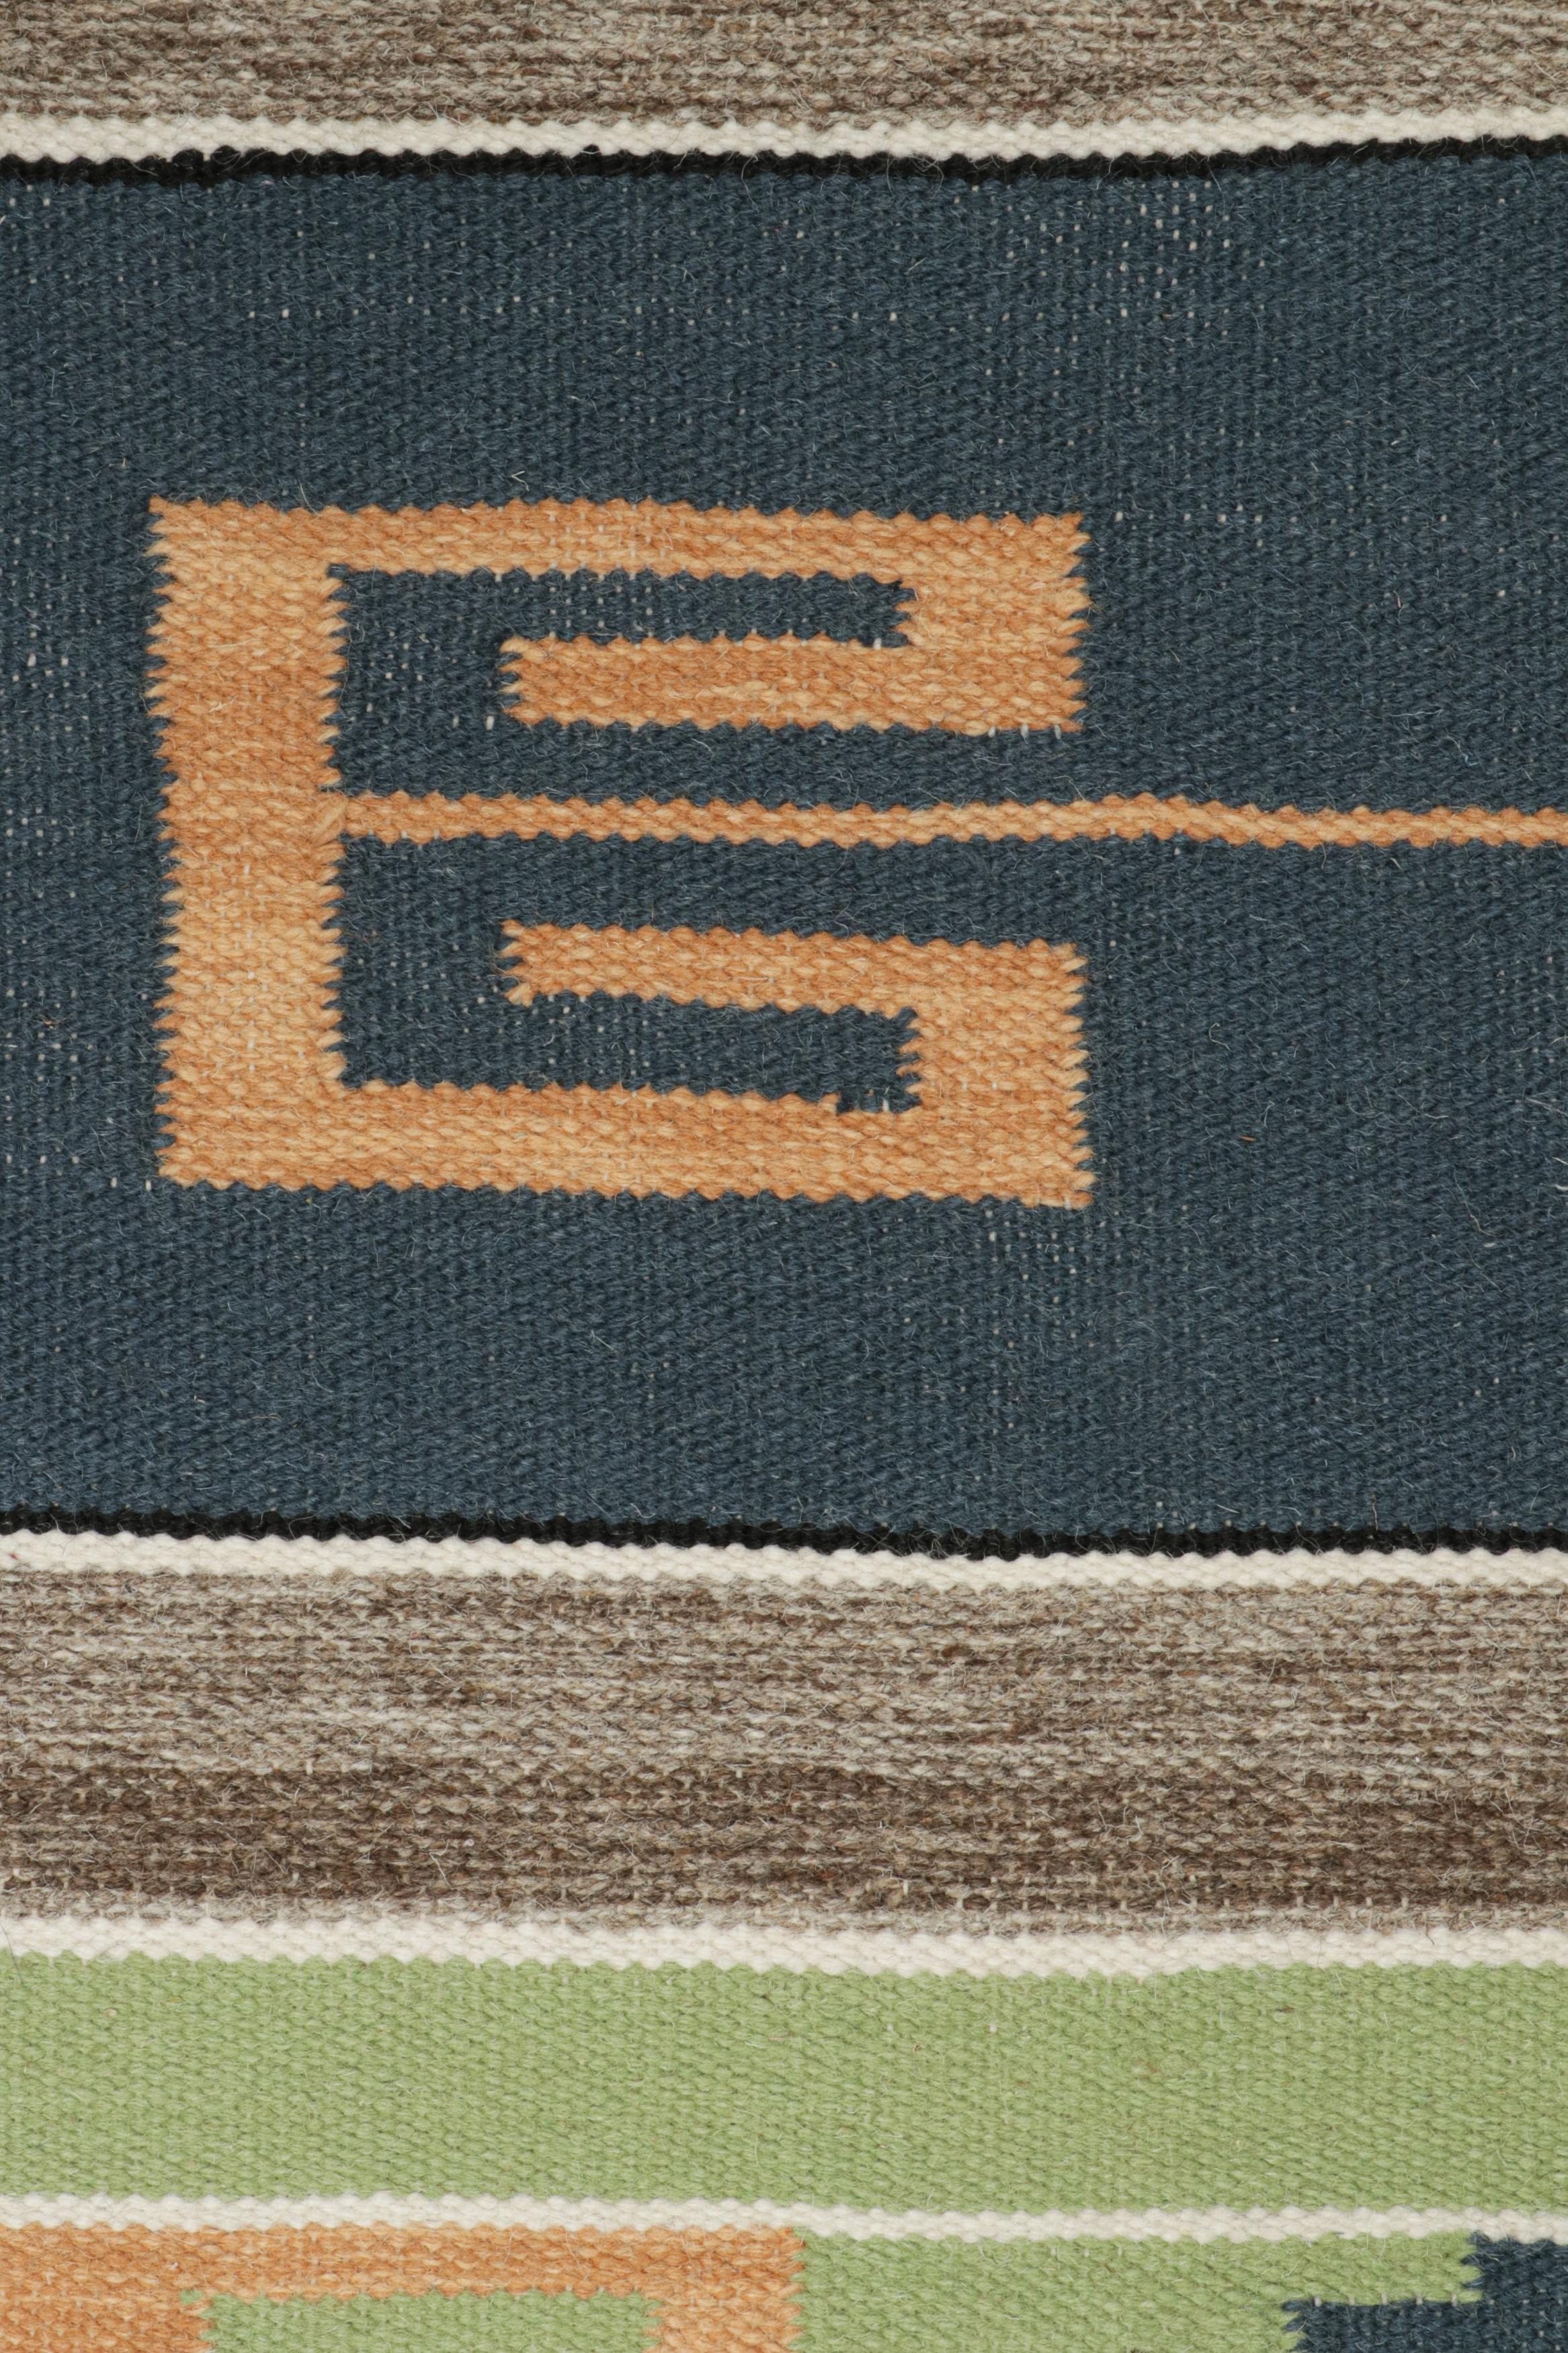 Rug & Kilim’s Tribal style Kilim in Blue, Gold, Green Patterns In New Condition For Sale In Long Island City, NY